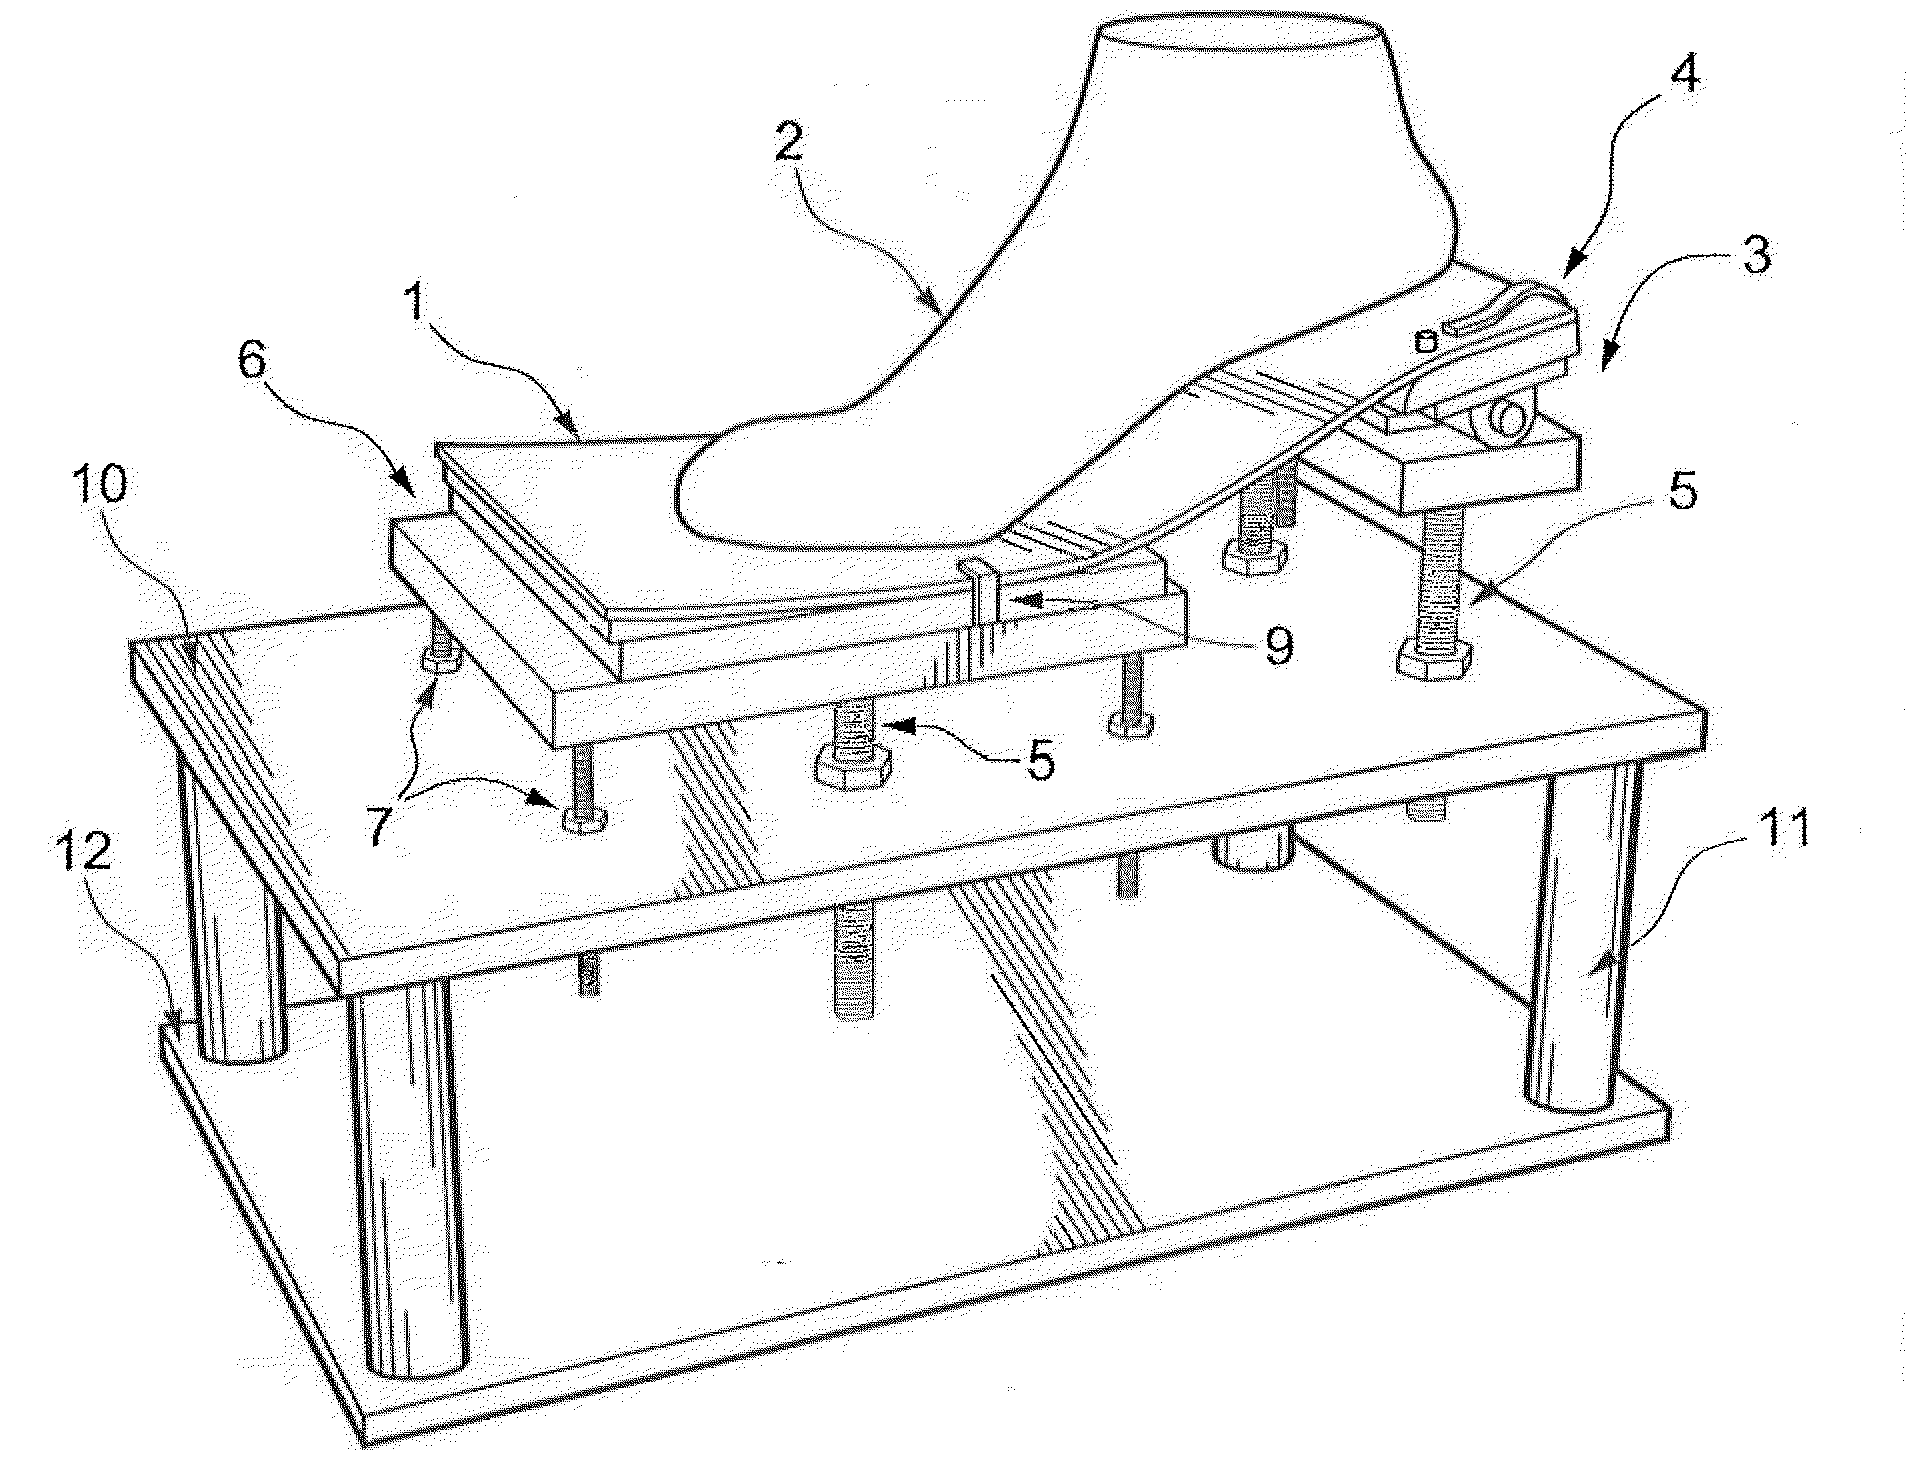 Customised shoe and insole, method and apparatus for determining shape of a foot and for making a shoe or insole